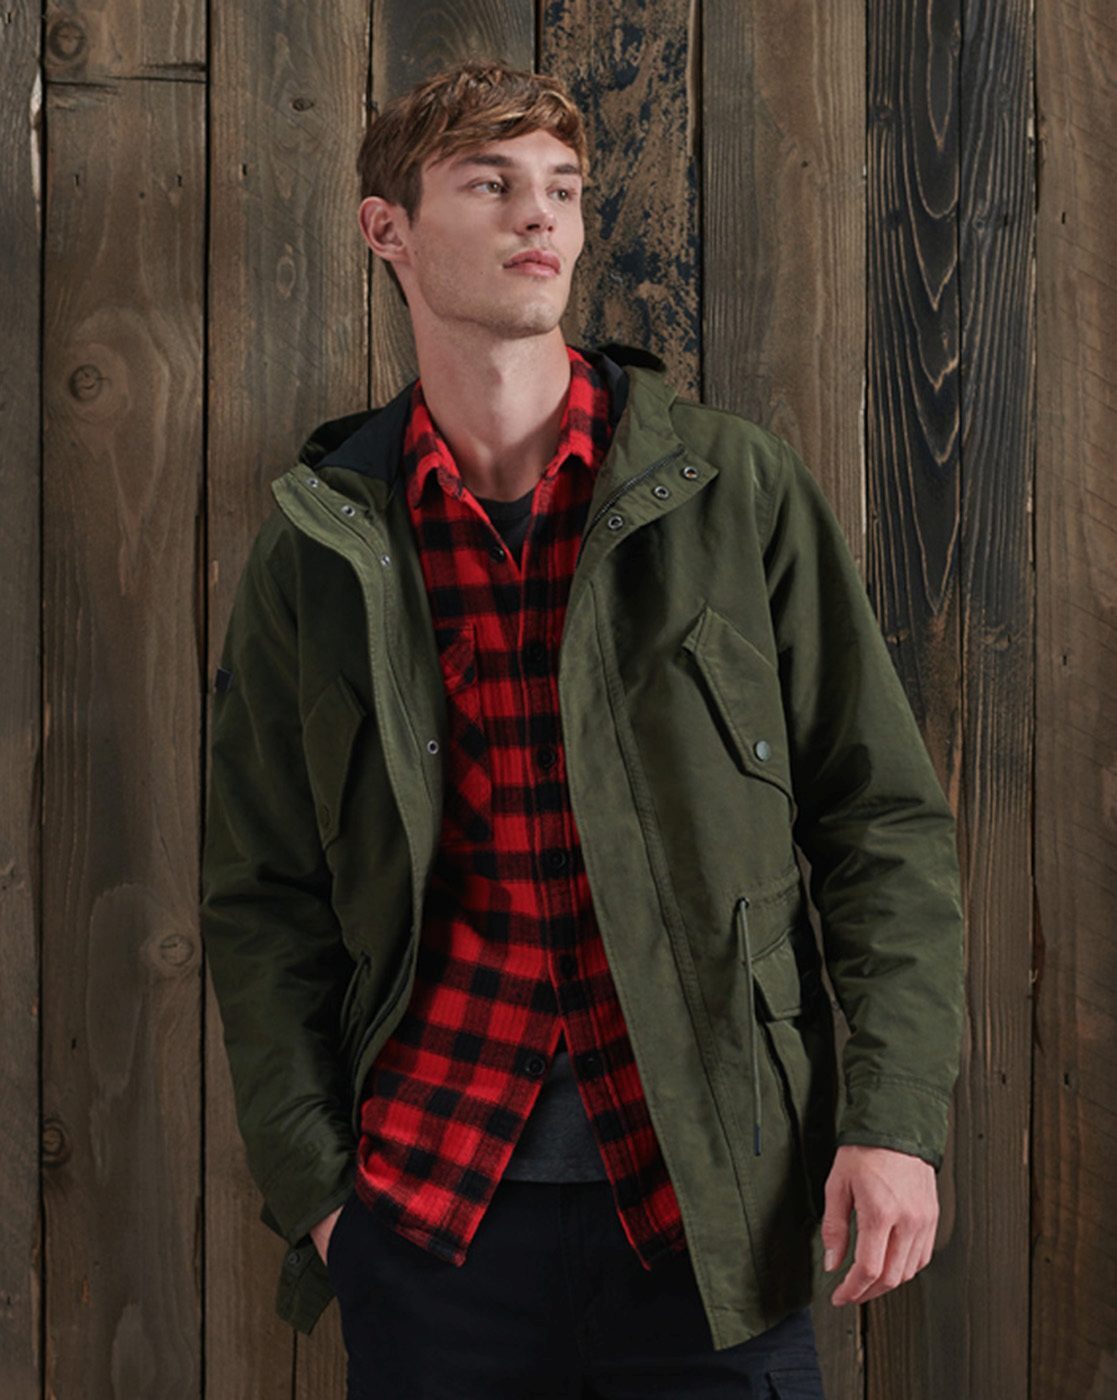 Buy Green Jackets & Coats for Men by SUPERDRY Online